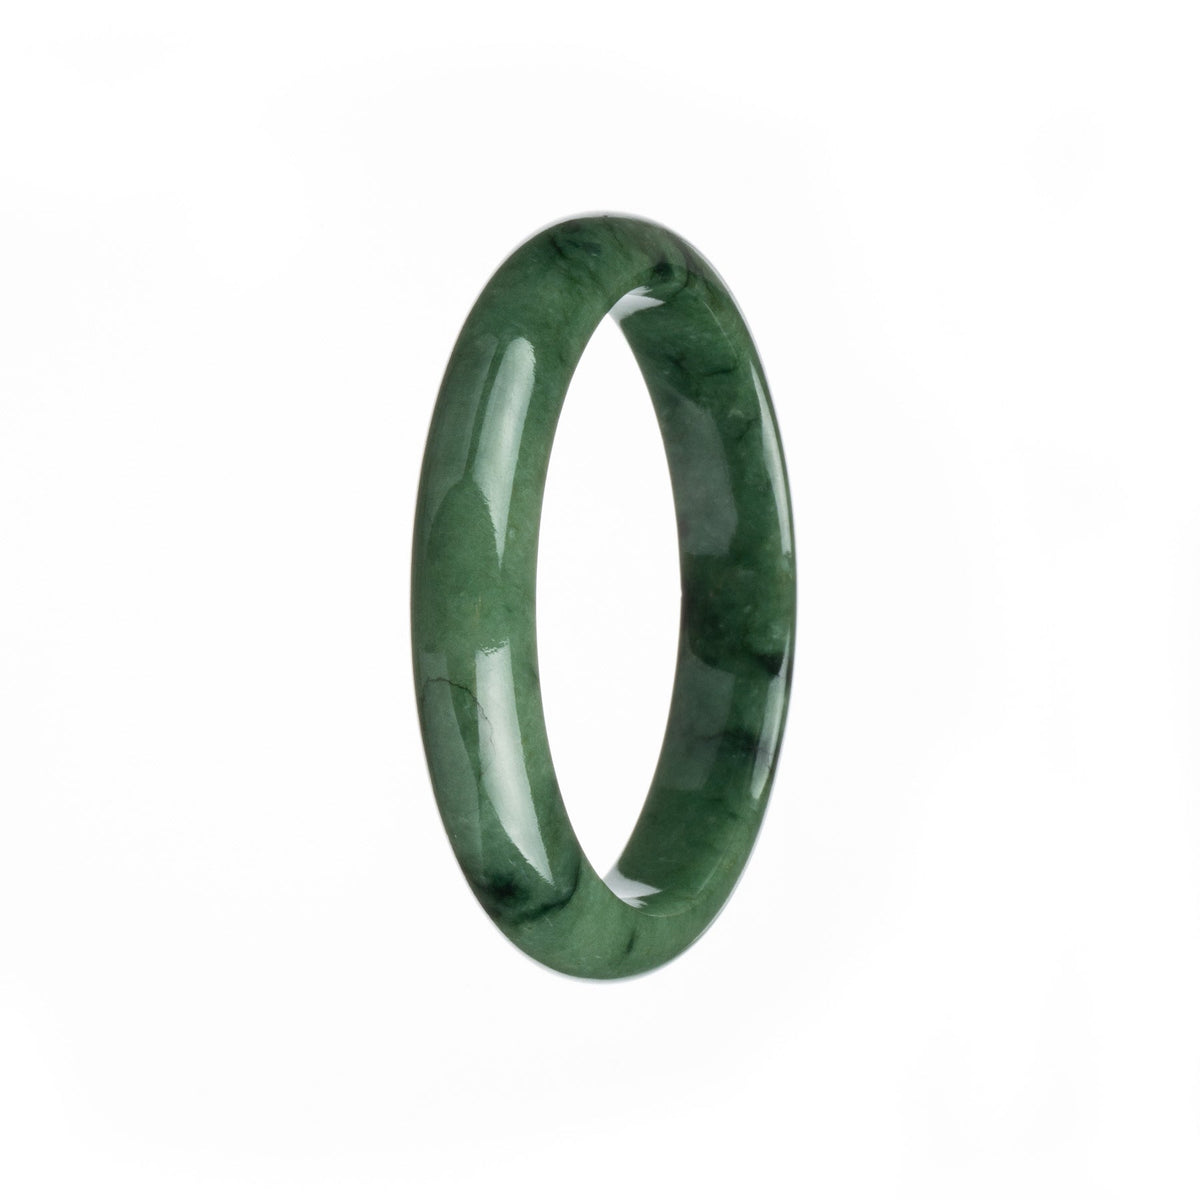 A close-up photo of a deep green traditional jade bangle bracelet with a half-moon shape, measuring 57mm. The bracelet is made of authentic Grade A jade and is called "MAYS".